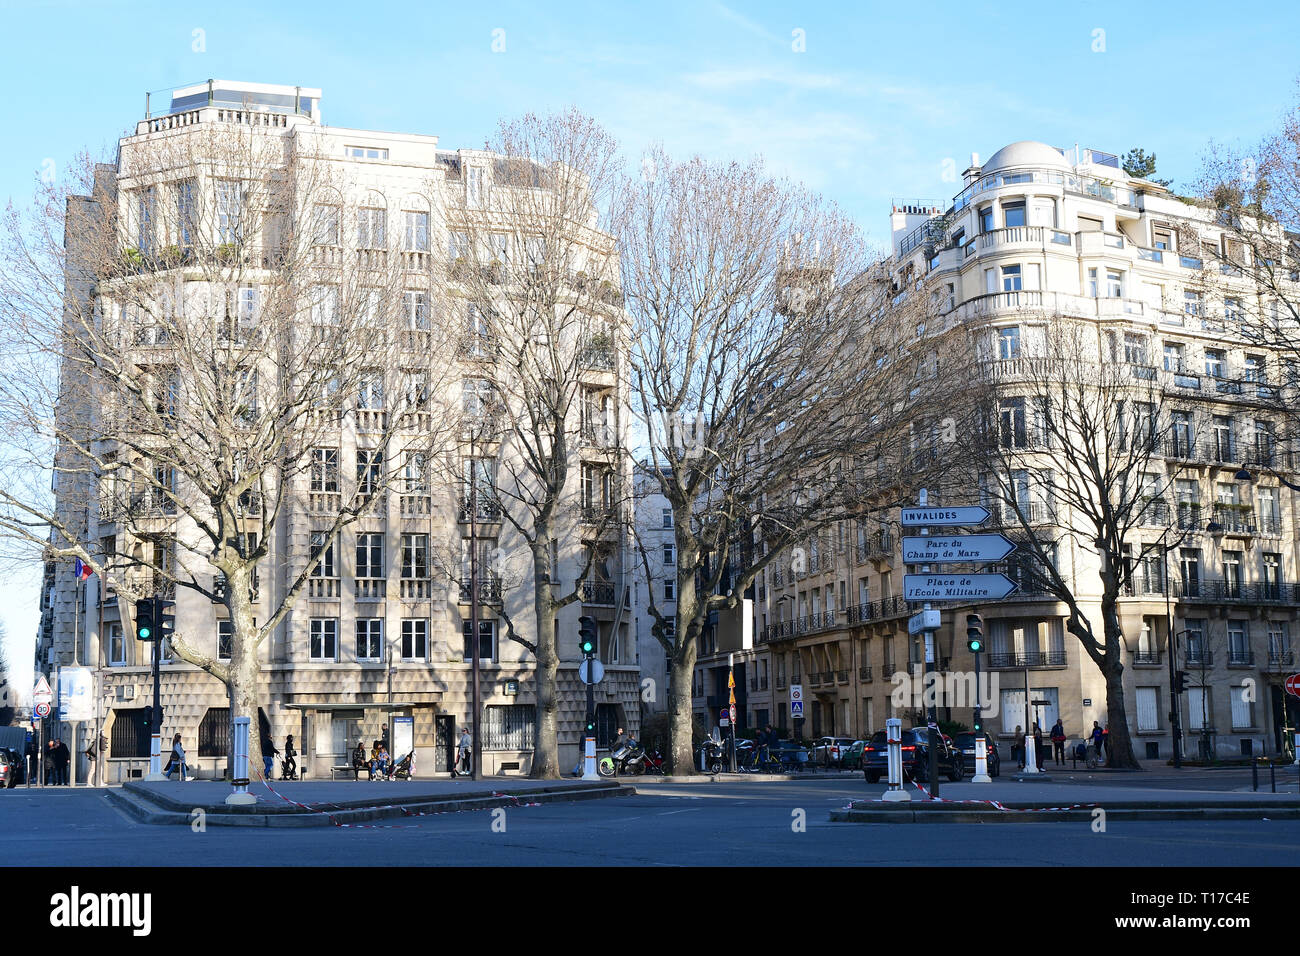 PARIS-FRANCE-FEB 24, 2019: The architecture of Paris has preserved the look and feel of many of its historic neighborhoods and streets, even though it Stock Photo